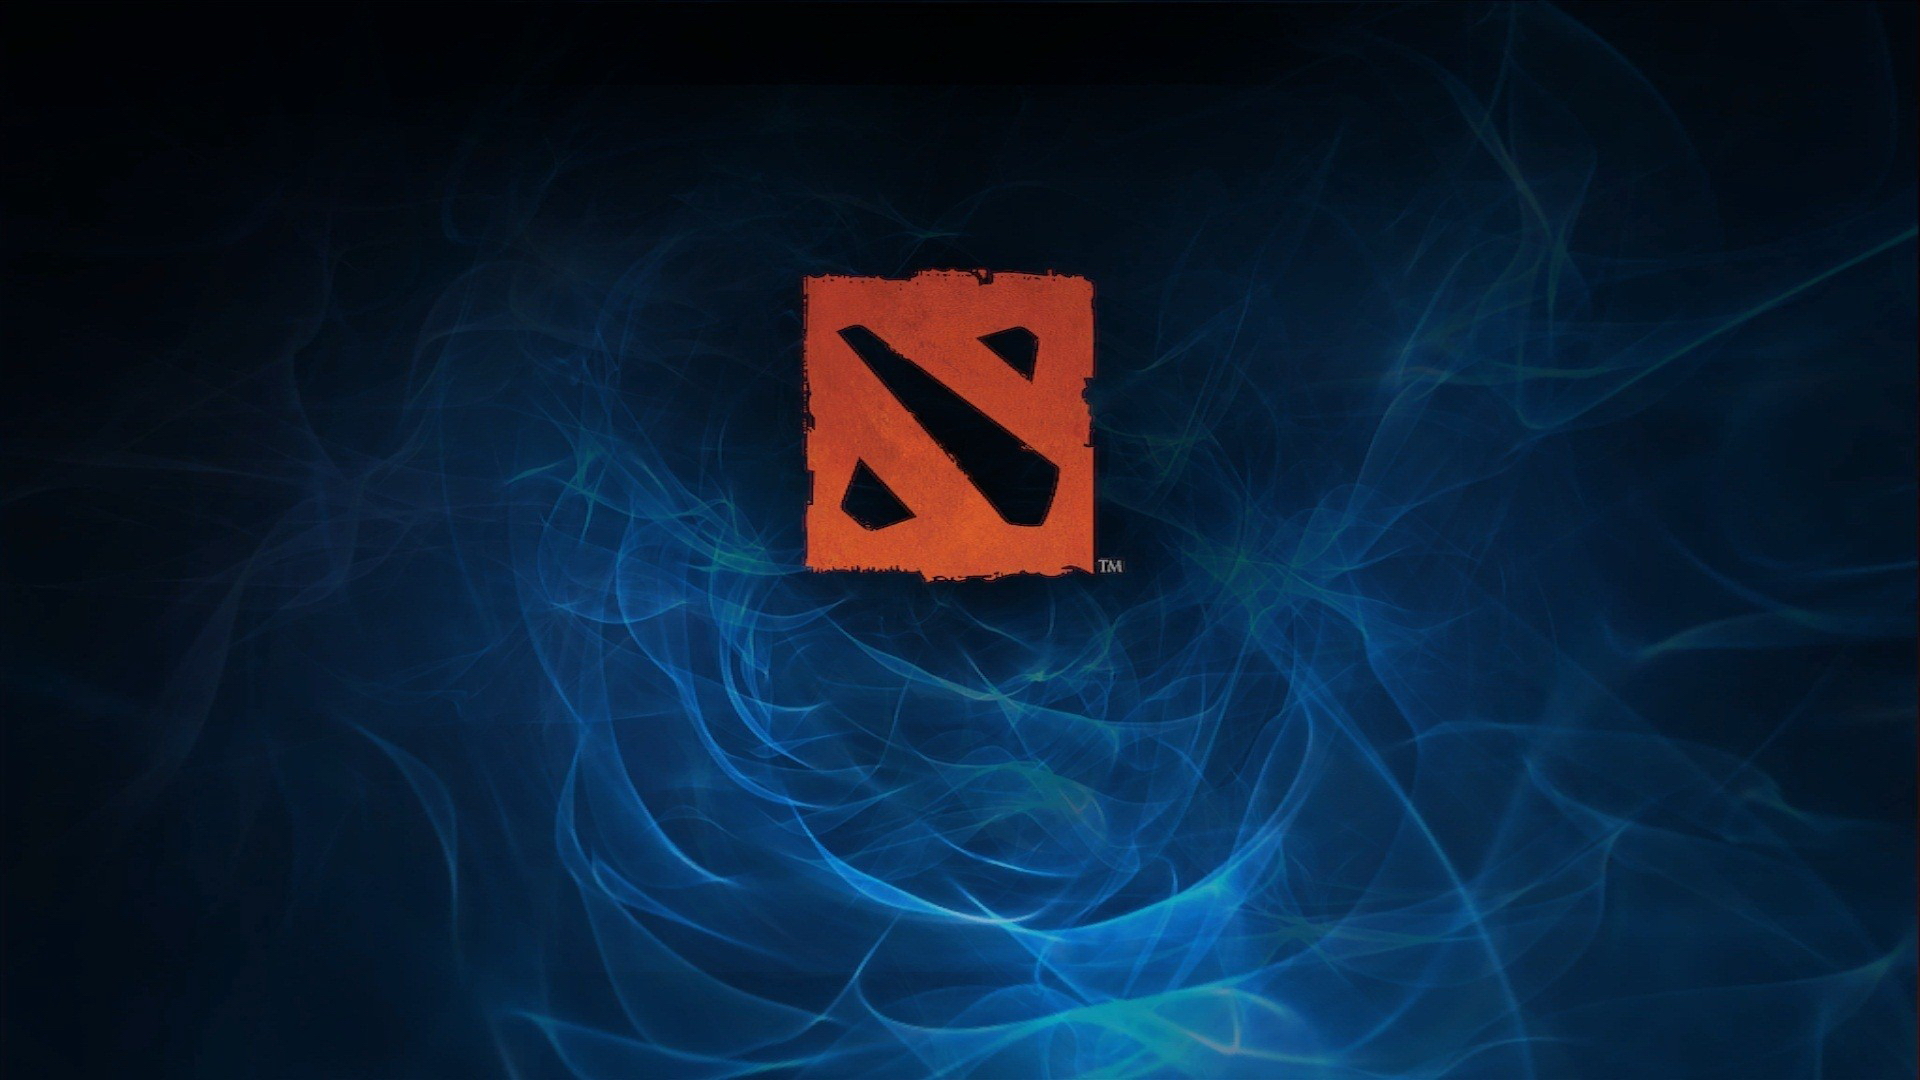 Best Mobile Dota 2 Backgrounds